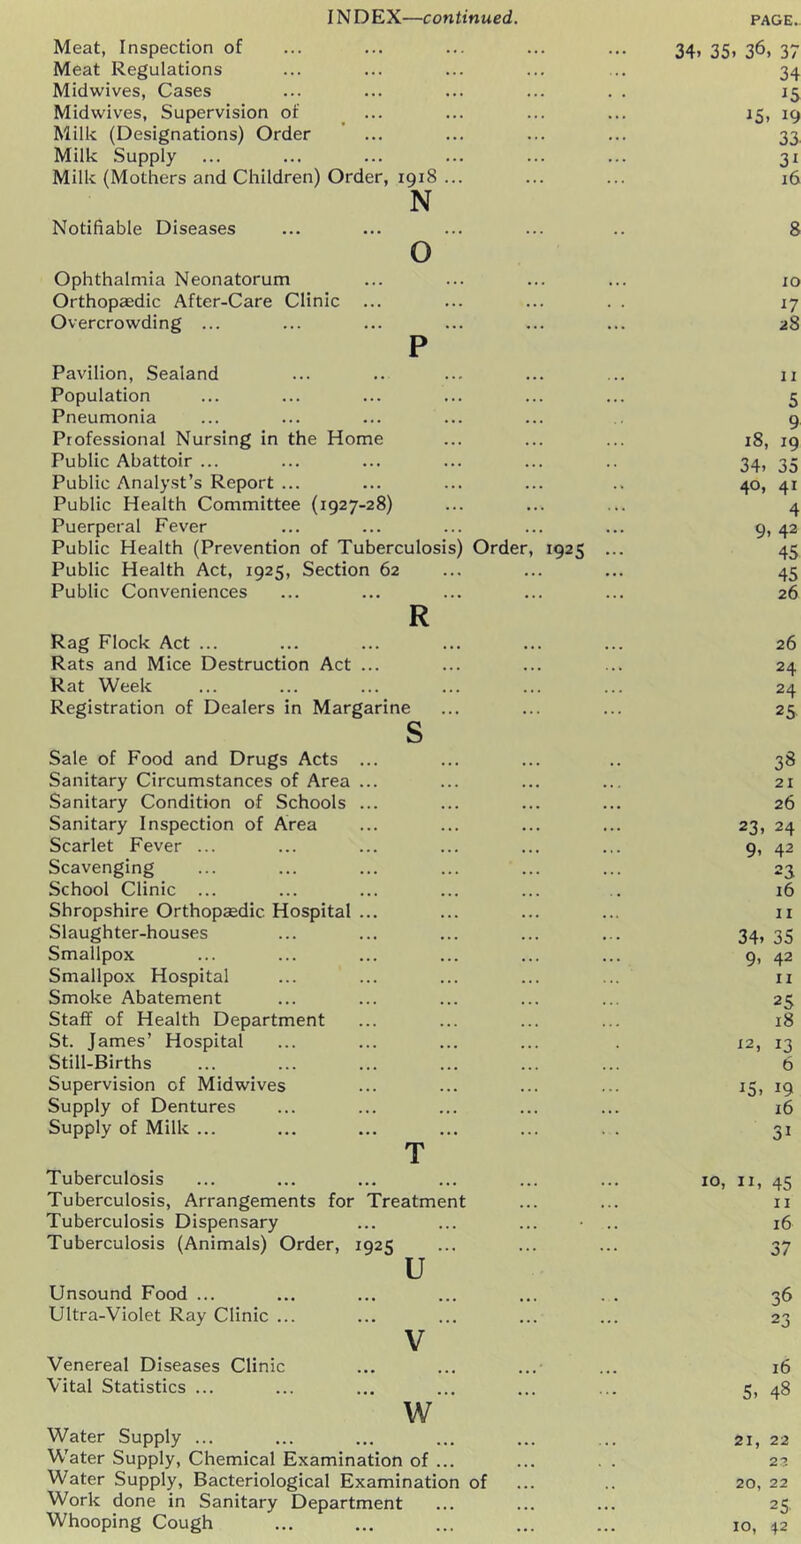 Meat, Inspection of Meat Regulations Midwives, Cases Mid wives. Supervision of , ••• Milk (Designations) Order ’ ... Milk Supply Milk (Mothers and Children) Order, 1918 ... N Notifiable Diseases o ophthalmia Neonatorum Orthopaedic After-Care Clinic ... Overcrowding ... P Pavilion, Sealand Population Pneumonia Professional Nursing in the Home Public Abattoir ... Public Analyst’s Report ... Public Health Committee (1927-28) Puerperal Fever Public Health (Prevention of Tuberculosis) Order, 1925 Public Health Act, 1925, Section 62 Public Conveniences R Rag Flock Act ... Rats and Mice Destruction Act ... Rat Week Registration of Dealers in Margarine s Sale of Food and Drugs Acts ... Sanitary Circumstances of Area ... Sanitary Condition of Schools ... Sanitary Inspection of Area Scarlet Fever ... Scavenging School Clinic ... Shropshire Orthopsedic Hospital ... Slaughter-houses Smallpox Smallpox Hospital Smoke Abatement Staff of Health Department St. James’ Hospital Still-Births Supervision of Mid wives Supply of Dentures Supply of Milk ... T Tuberculosis Tuberculosis, Arrangements for Treatment Tuberculosis Dispensary Tuberculosis (Animals) Order, 1925 u Unsound Food ... Ultra-Violet Ray Clinic ... V Venereal Diseases Clinic Vital Statistics ... w Water Supply ... Water Supply, Chemical Examination of ... Water Supply, Bacteriological Examination of Work done in Sanitary Department Whooping Cough